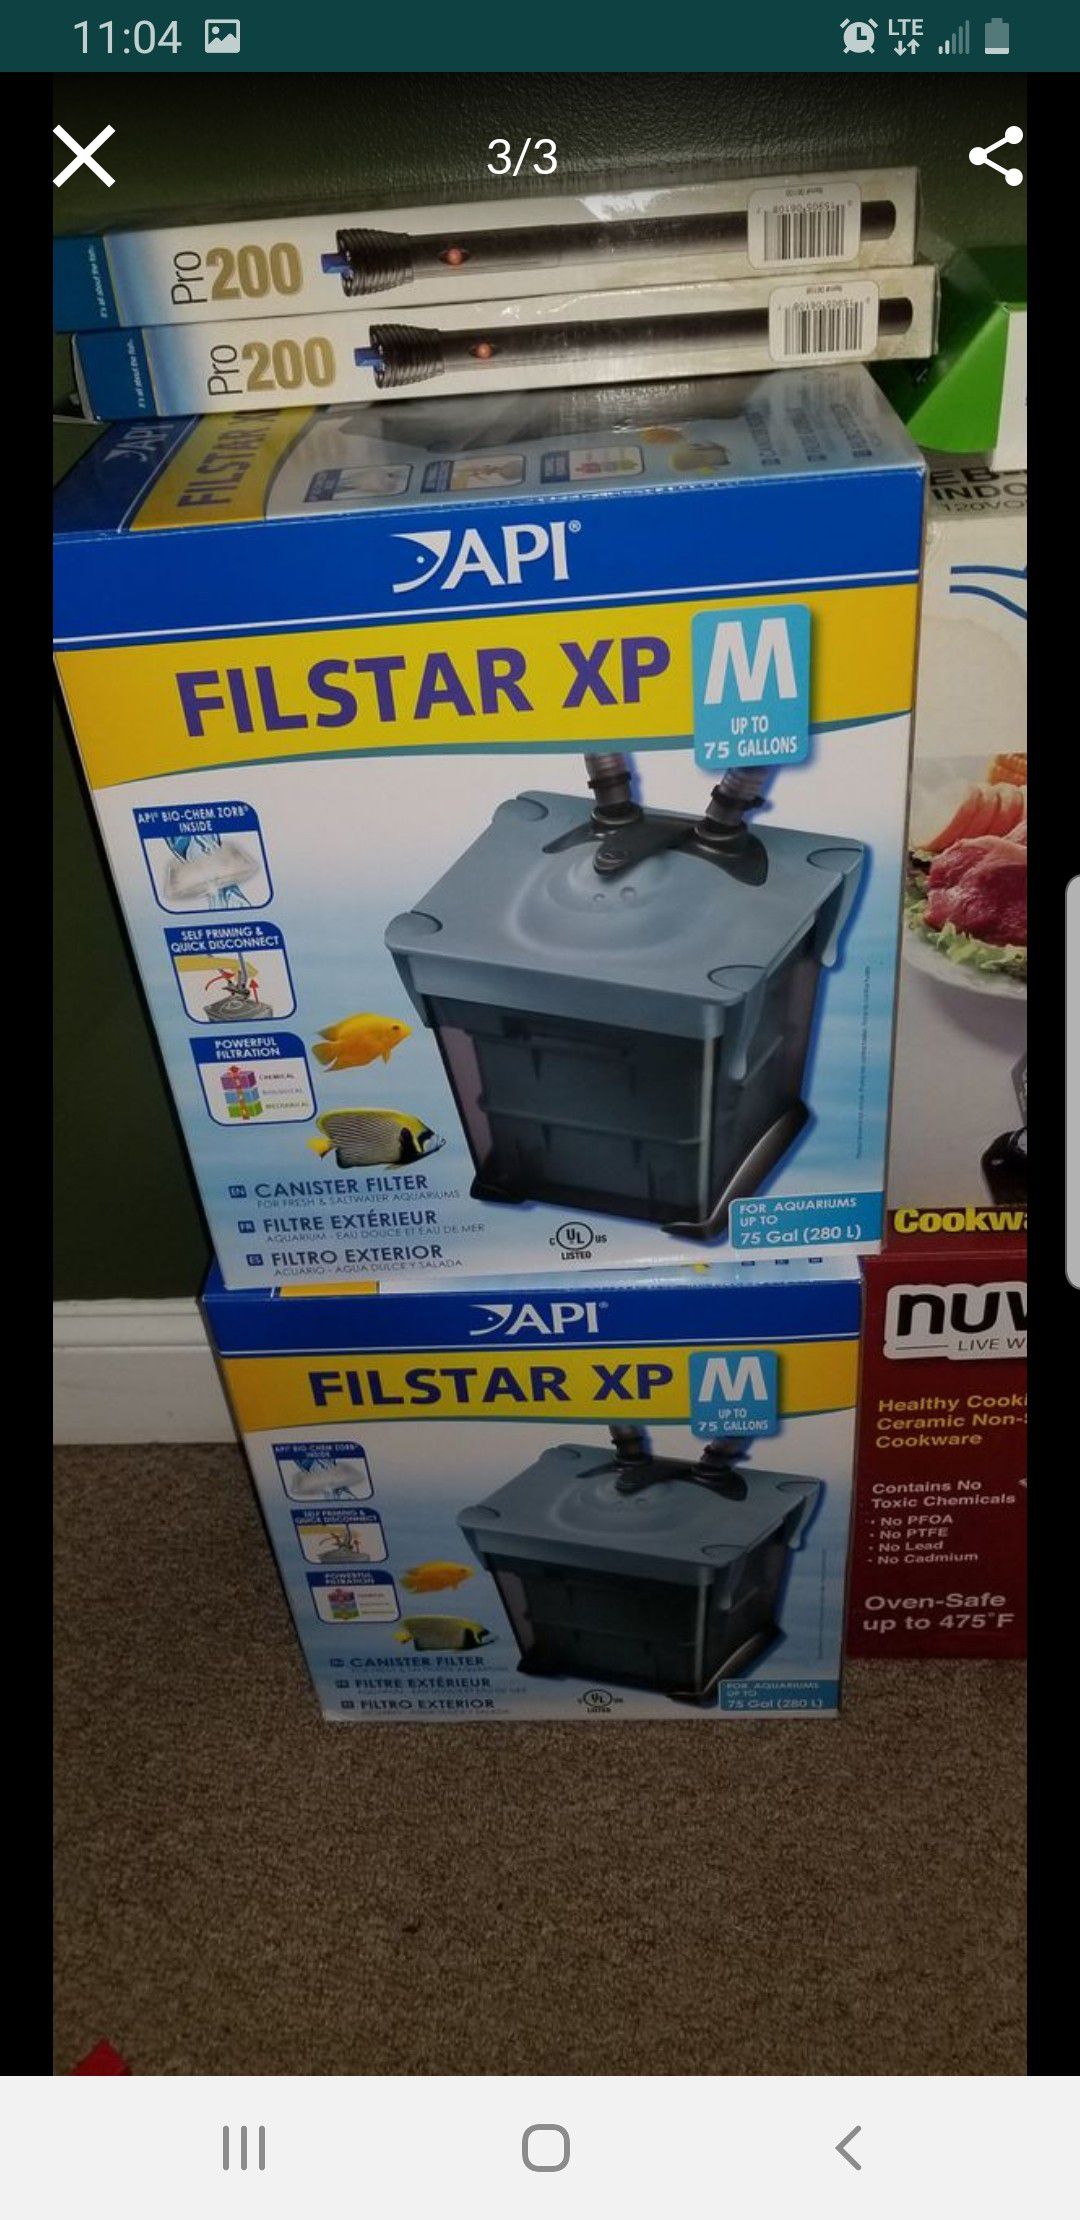 FILSTAR API XP-M - Canister Filters - Rated up to 75 Gallons each with 2 compartments for Media and filter floss etc